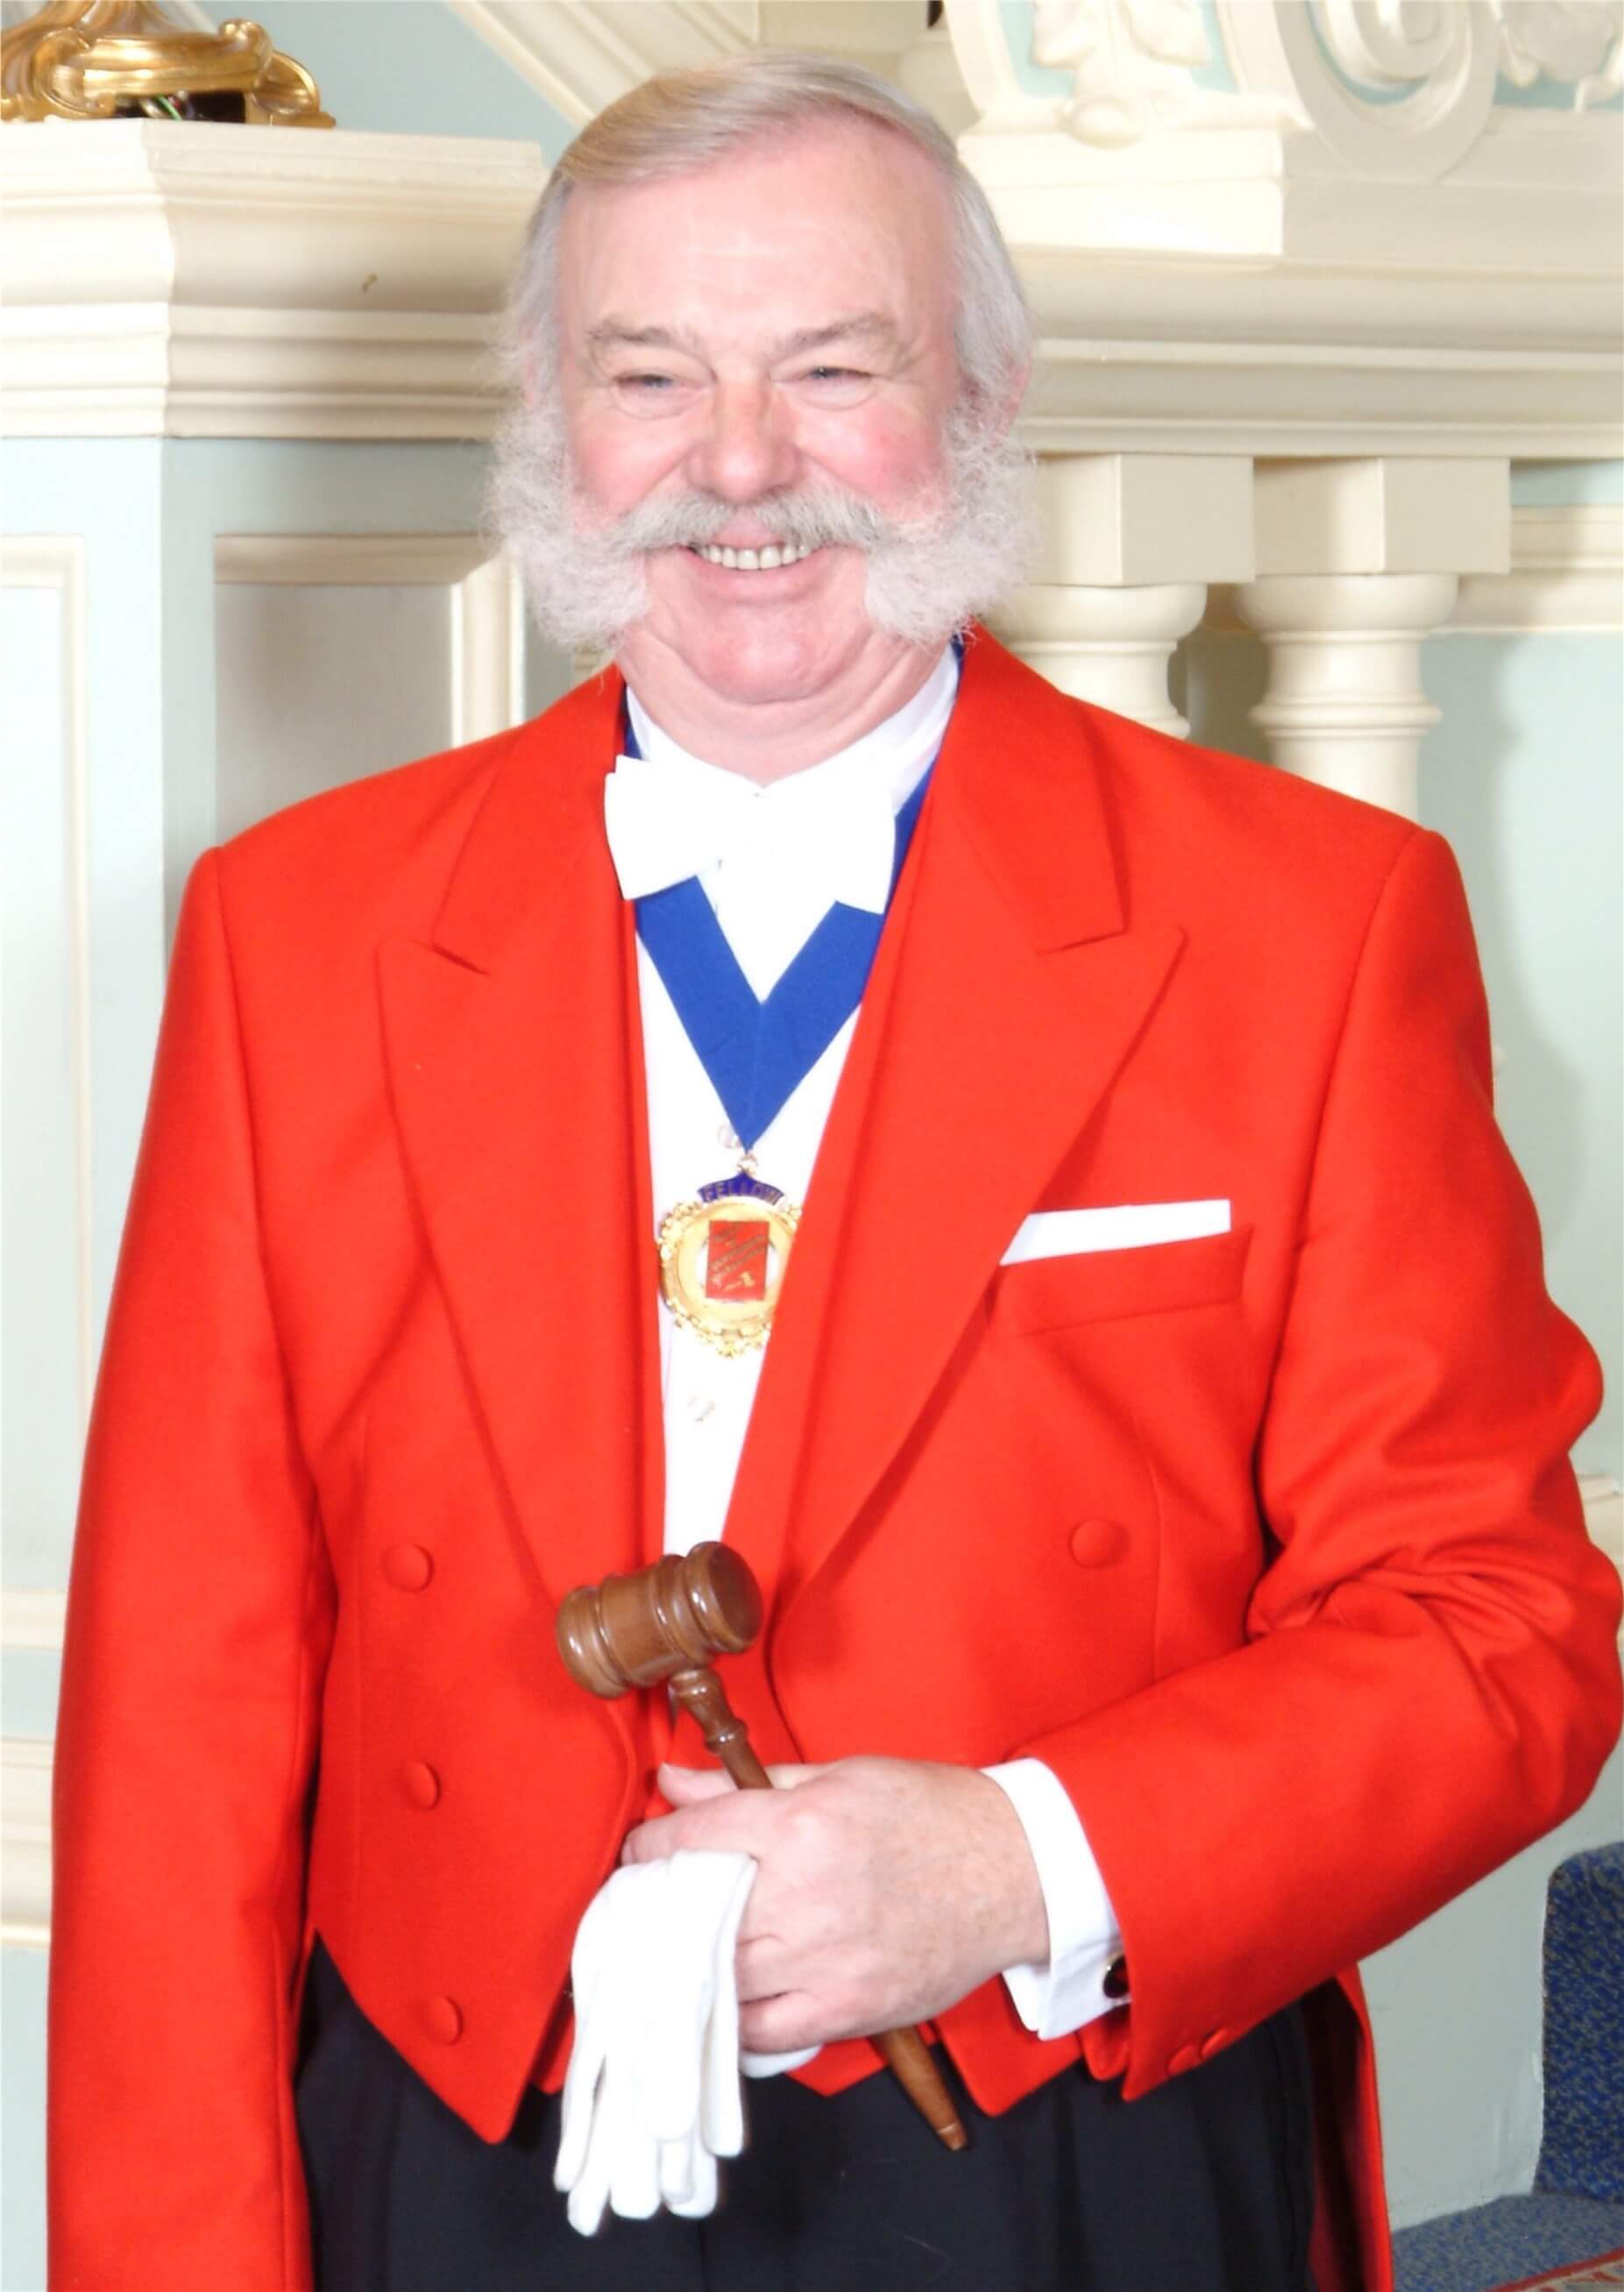 Professional Toastmaster and Master of Ceremonies Hertfordshire - Brian Sanders